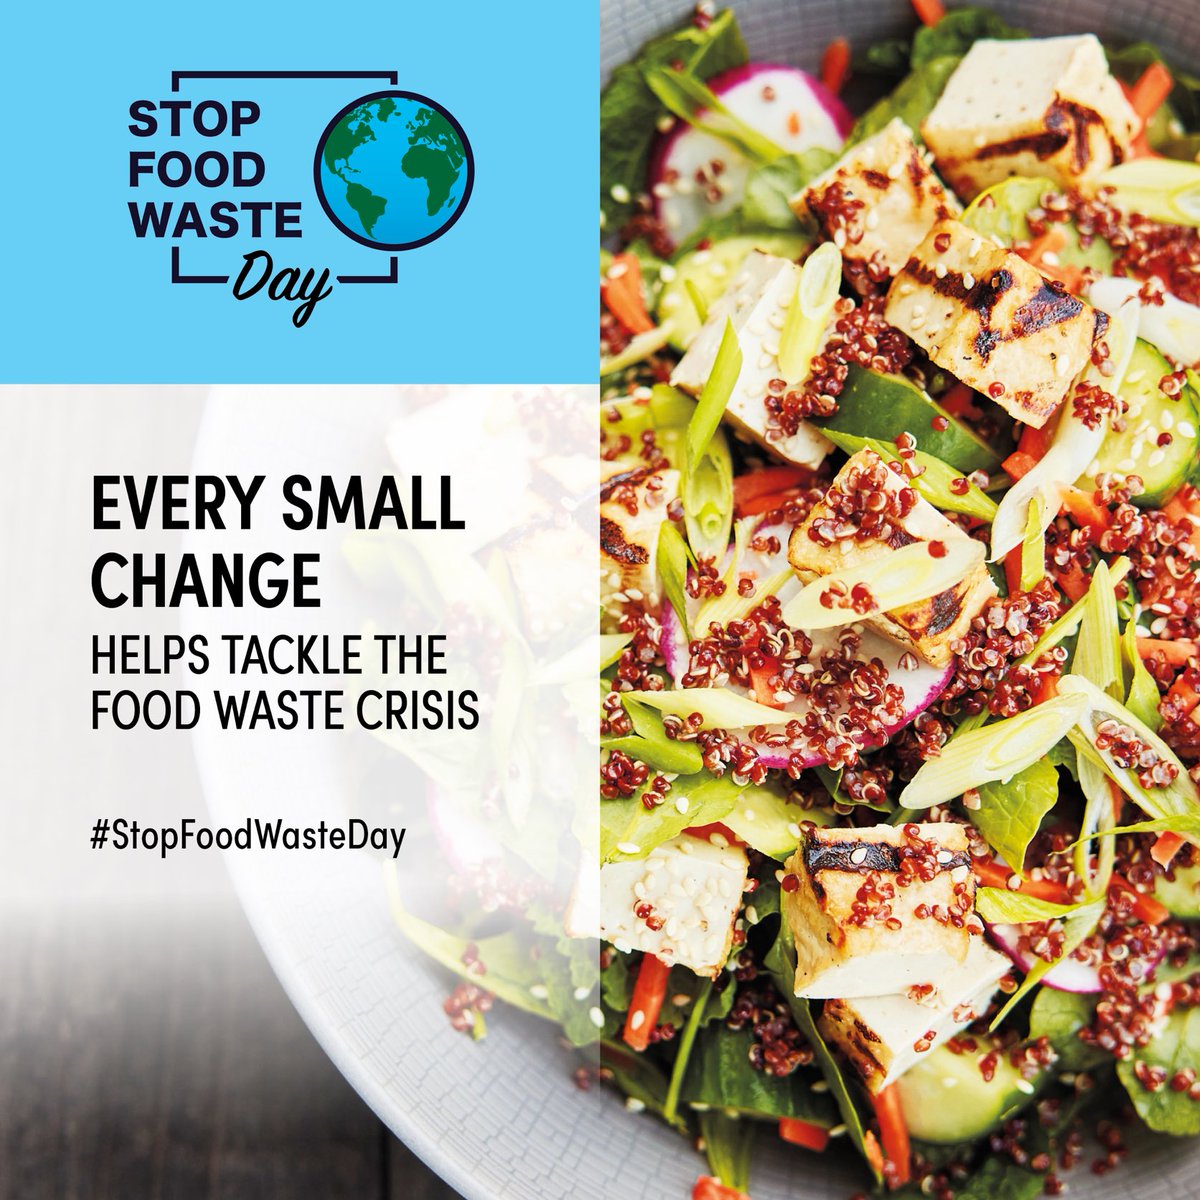 What changes can you make to help reduce food waste ? 🌍⁦@stmarysmwell⁩ ⁦@FVandC⁩ ⁦@churchscotland⁩ ⁦@ecocongregation⁩ ⁦@_StopFoodWaste_⁩